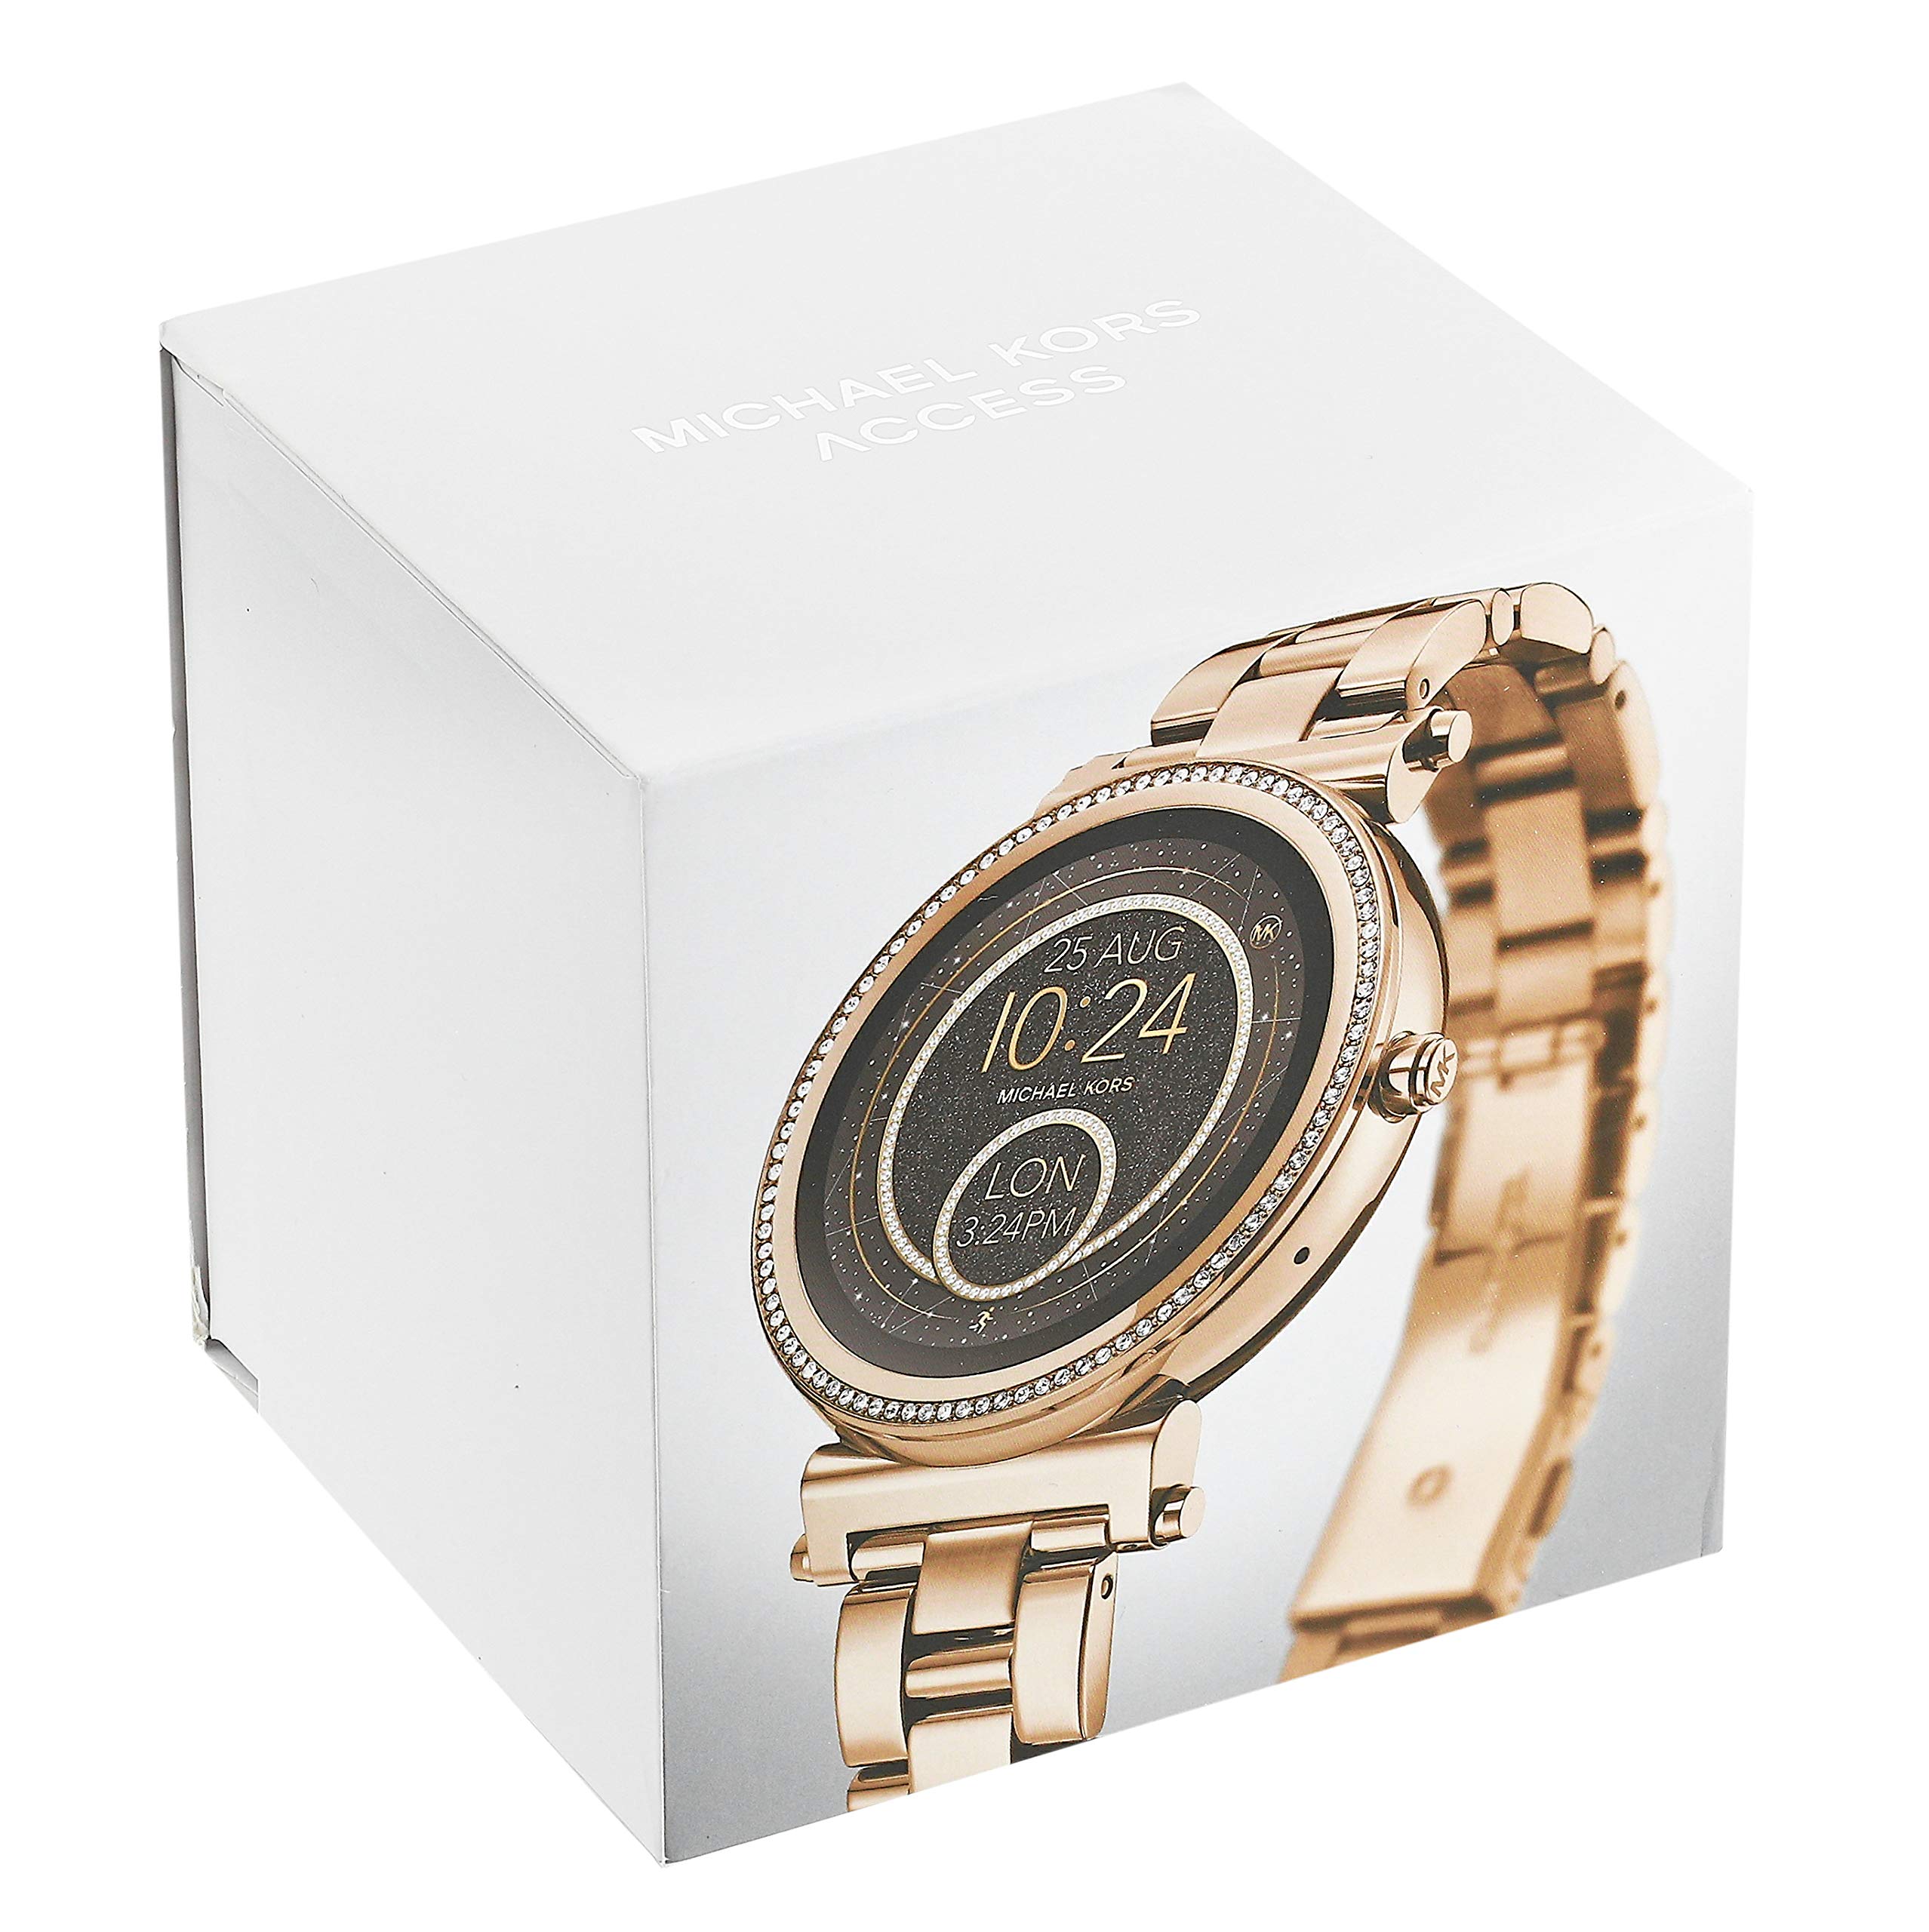 Michael Kors Watches TwoTone Chronograph with Stones  Shopping From USA